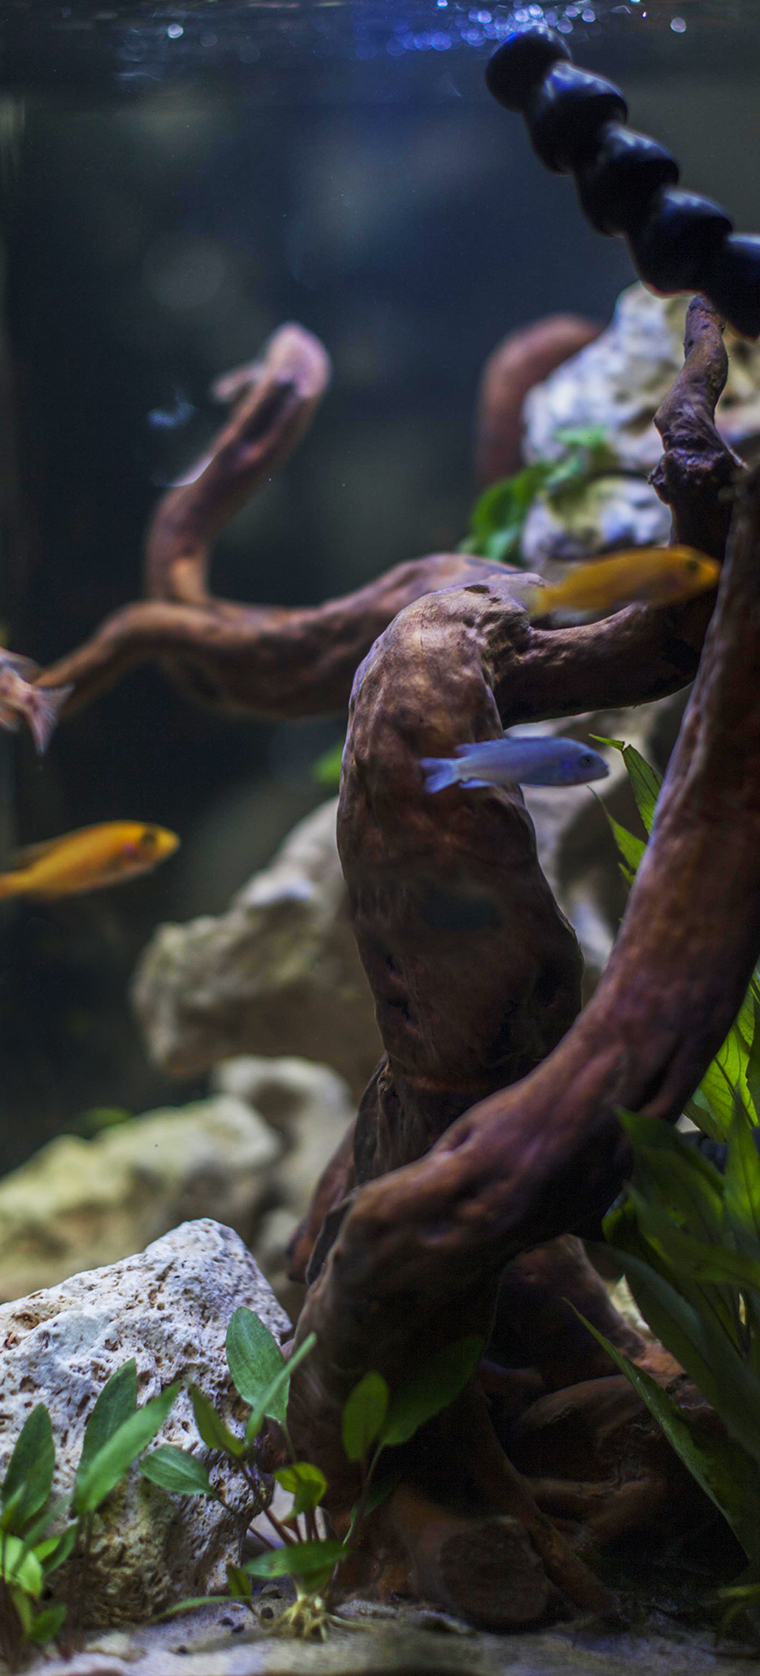 A healthy looking aquarium with orange and blue fish, wood, rocks and plants